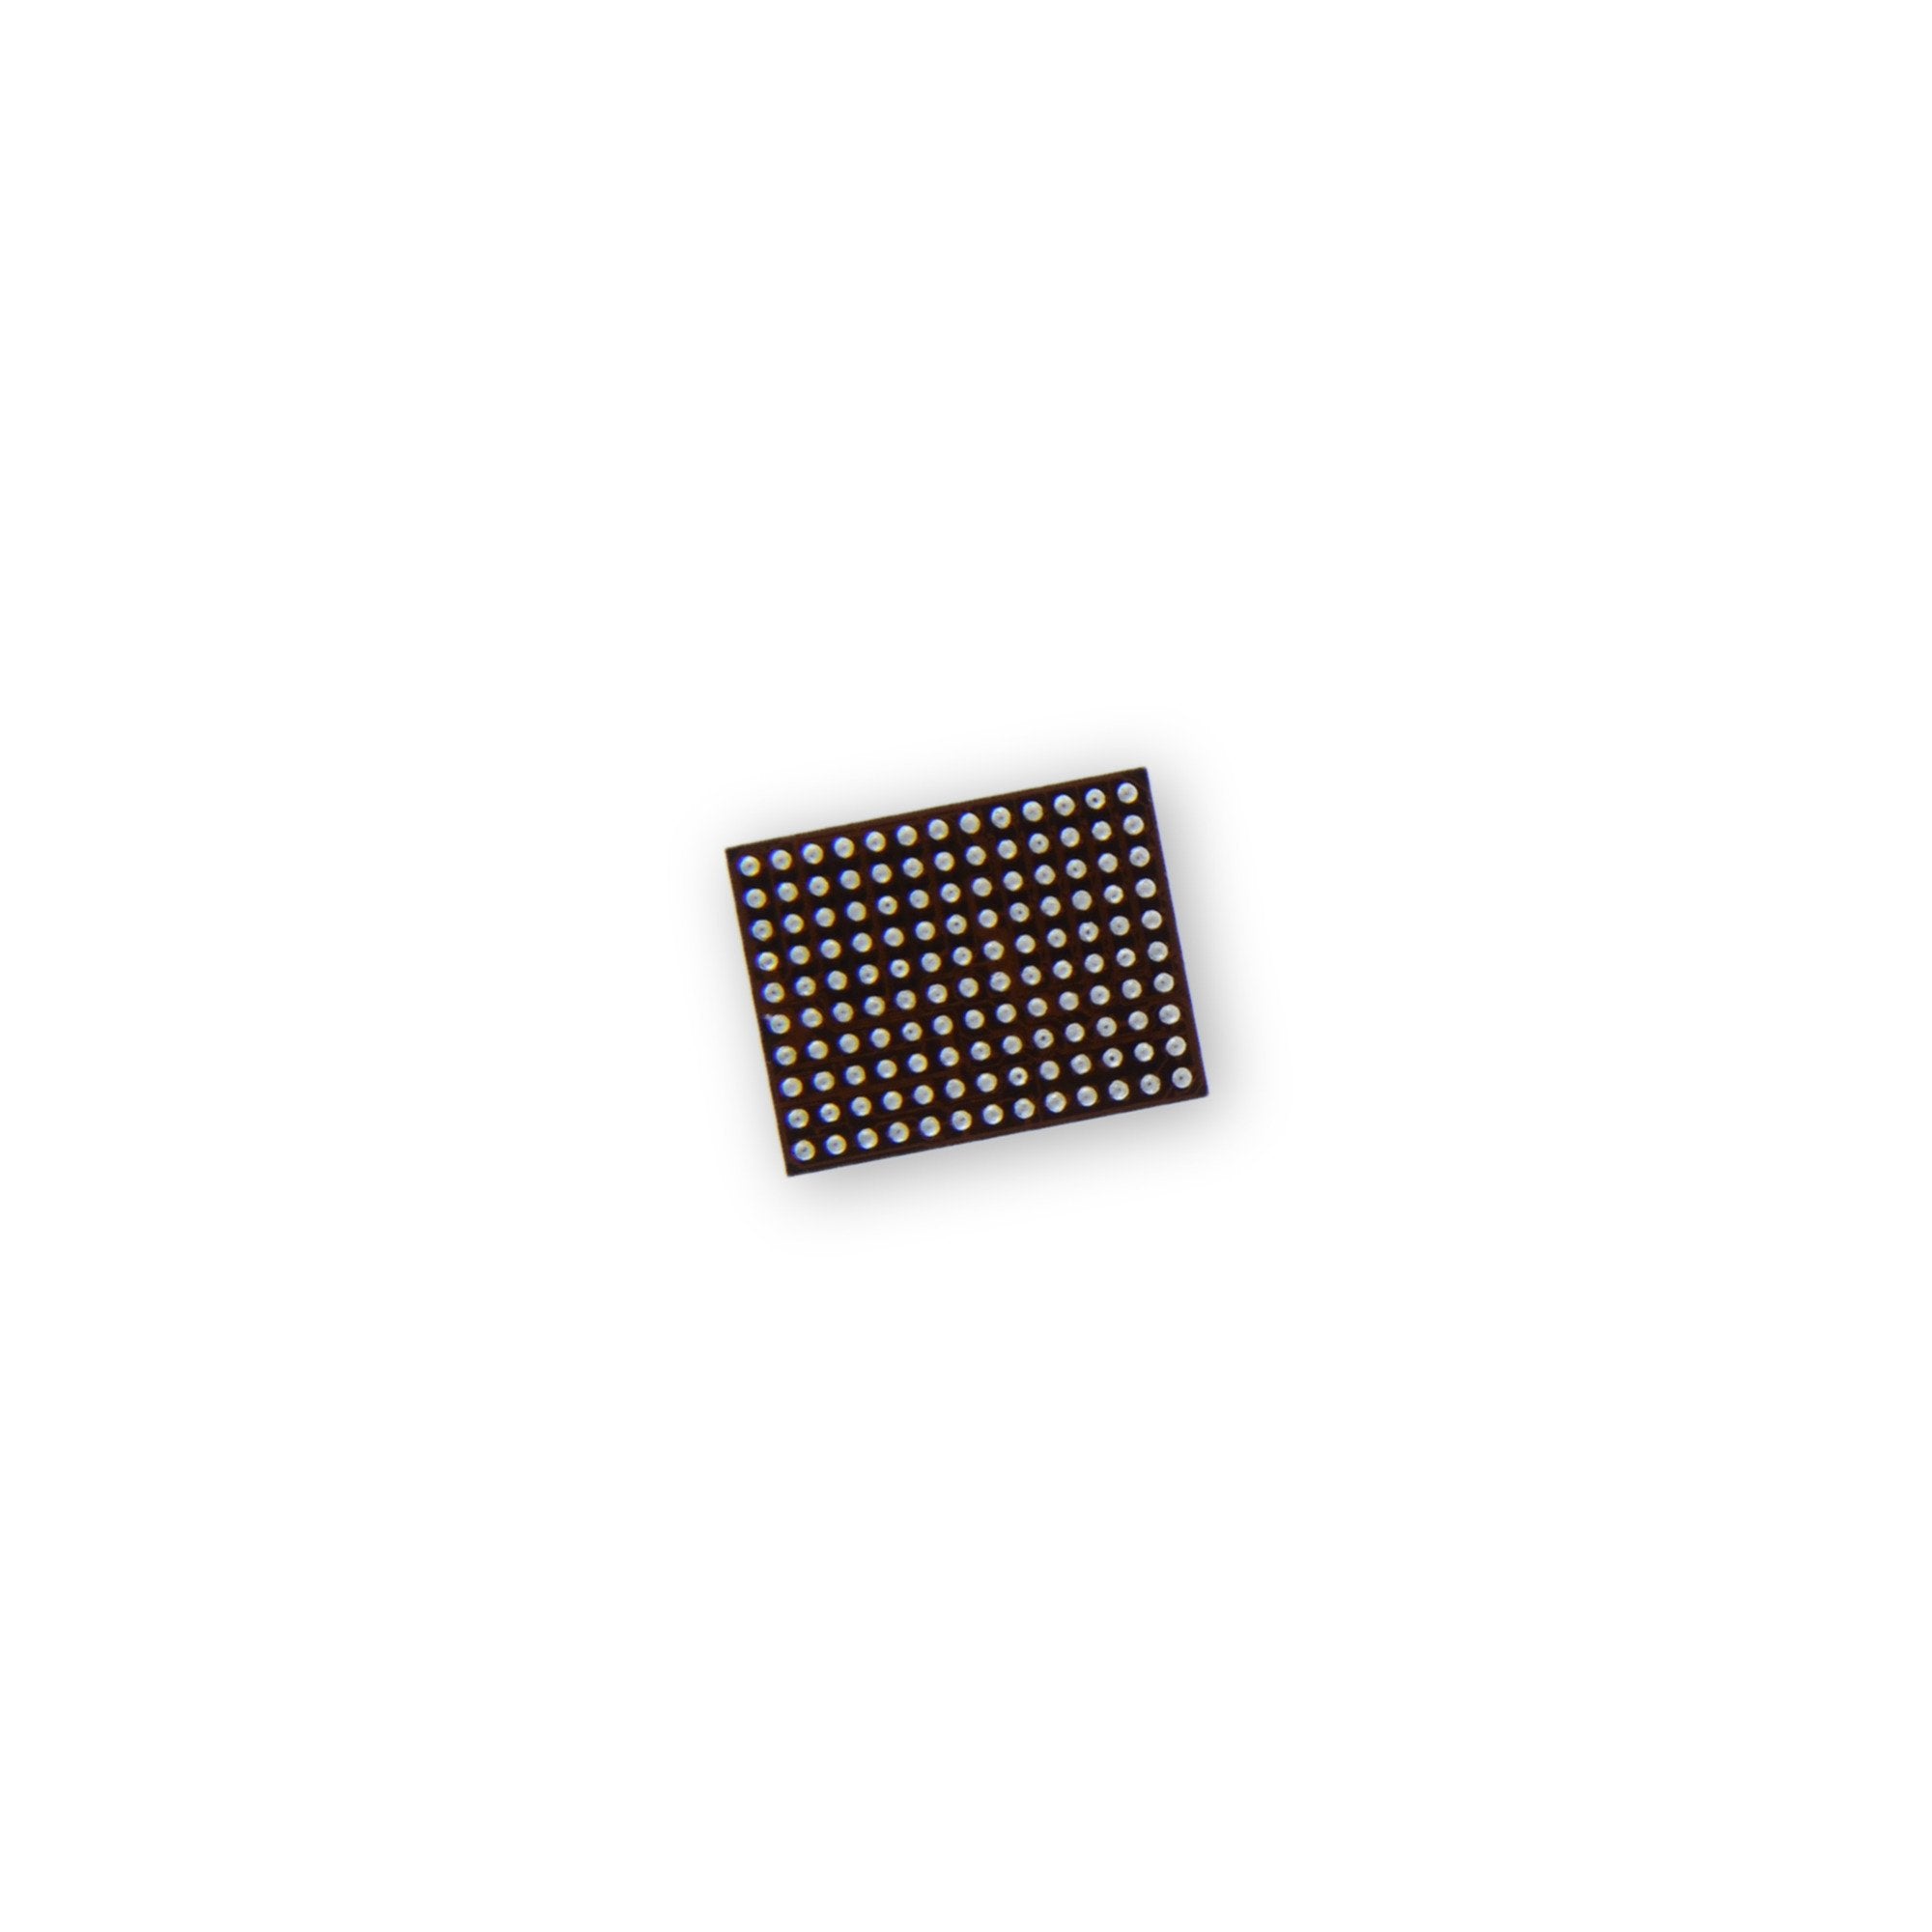 iPhone 6/6 Plus 343S0694 Touch IC